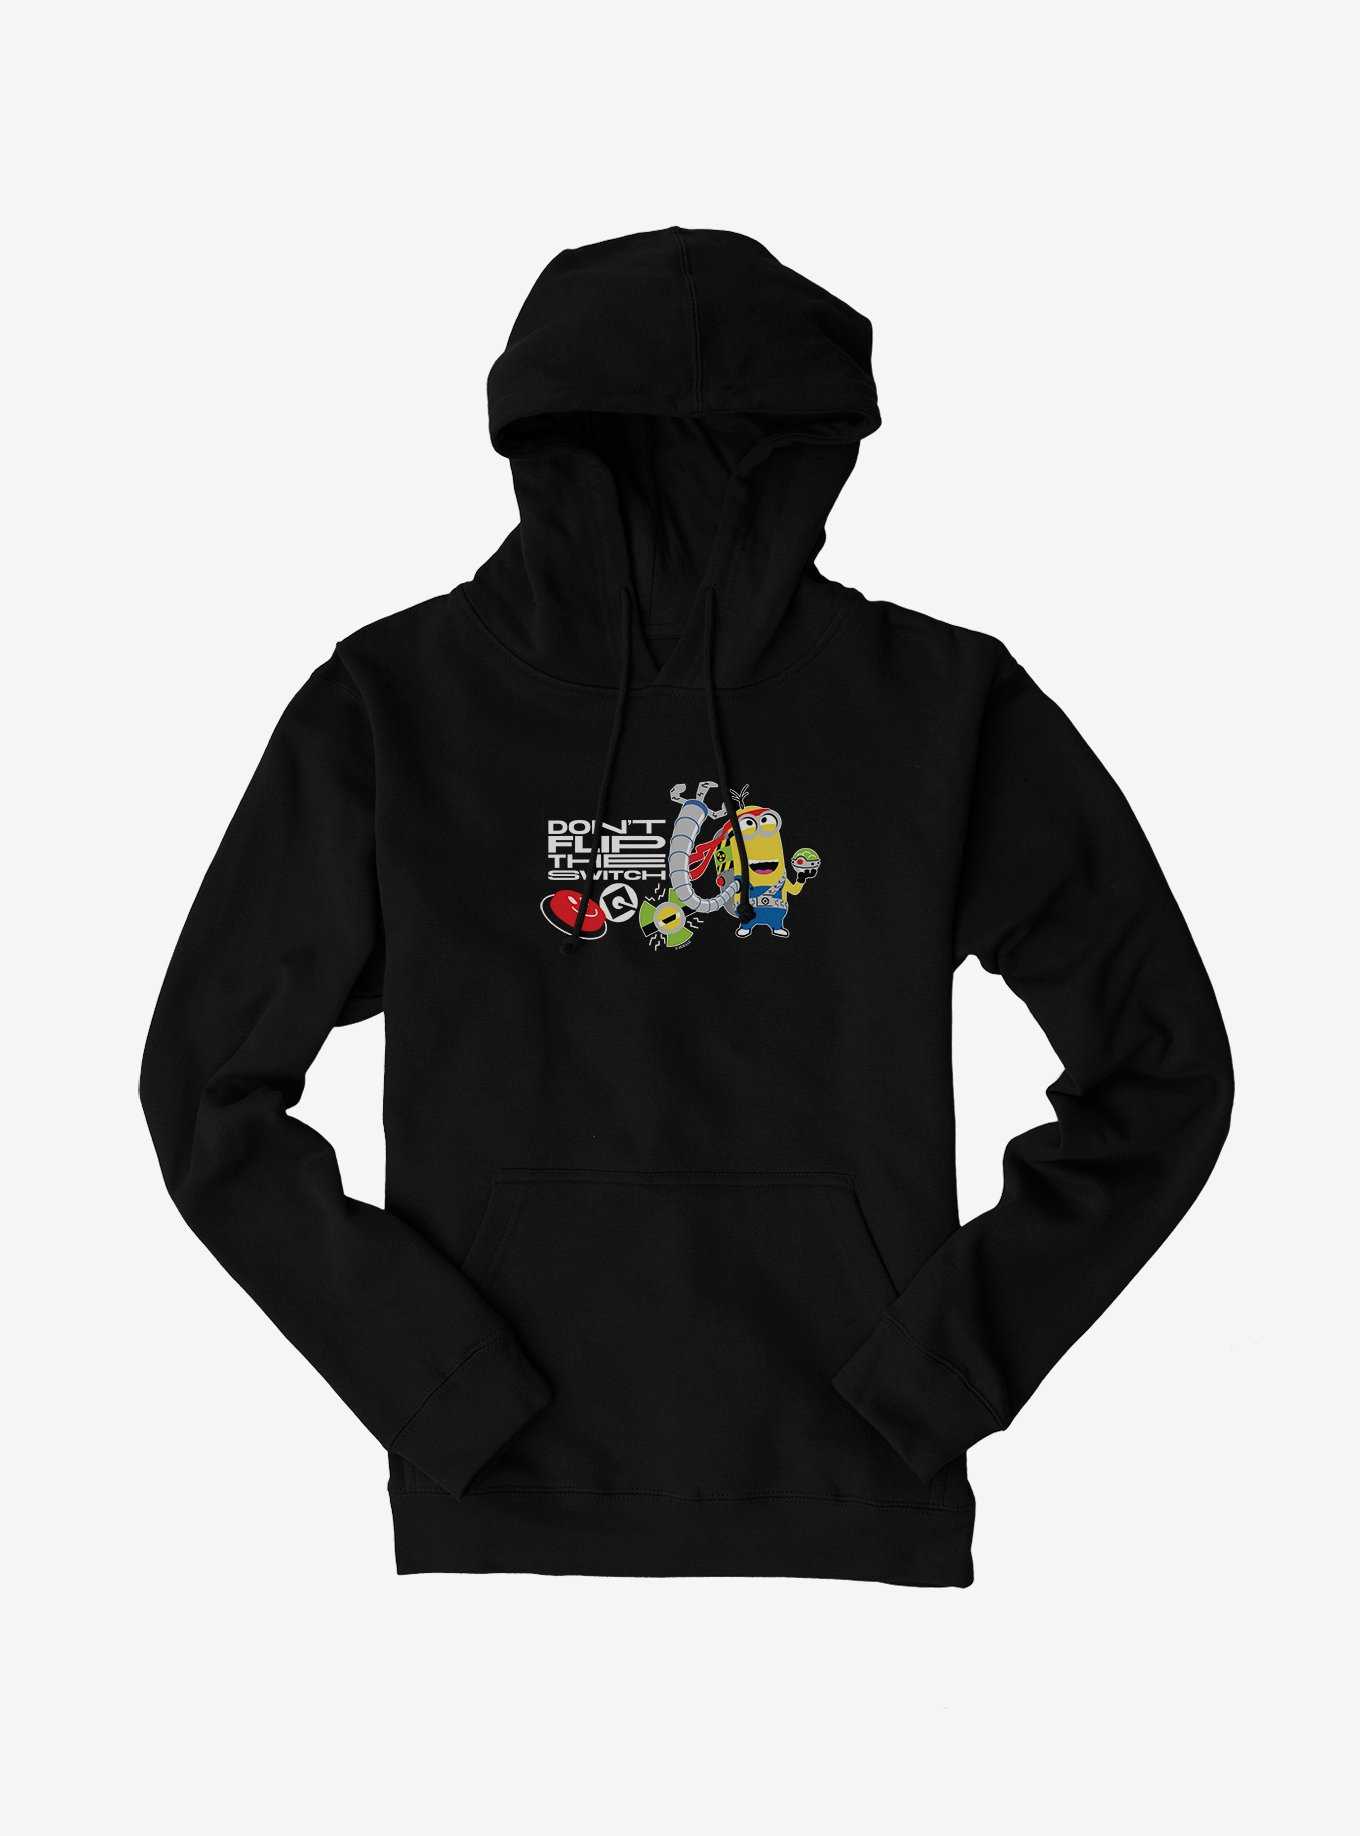 Minions Evil Intentions Hoodie, , hi-res